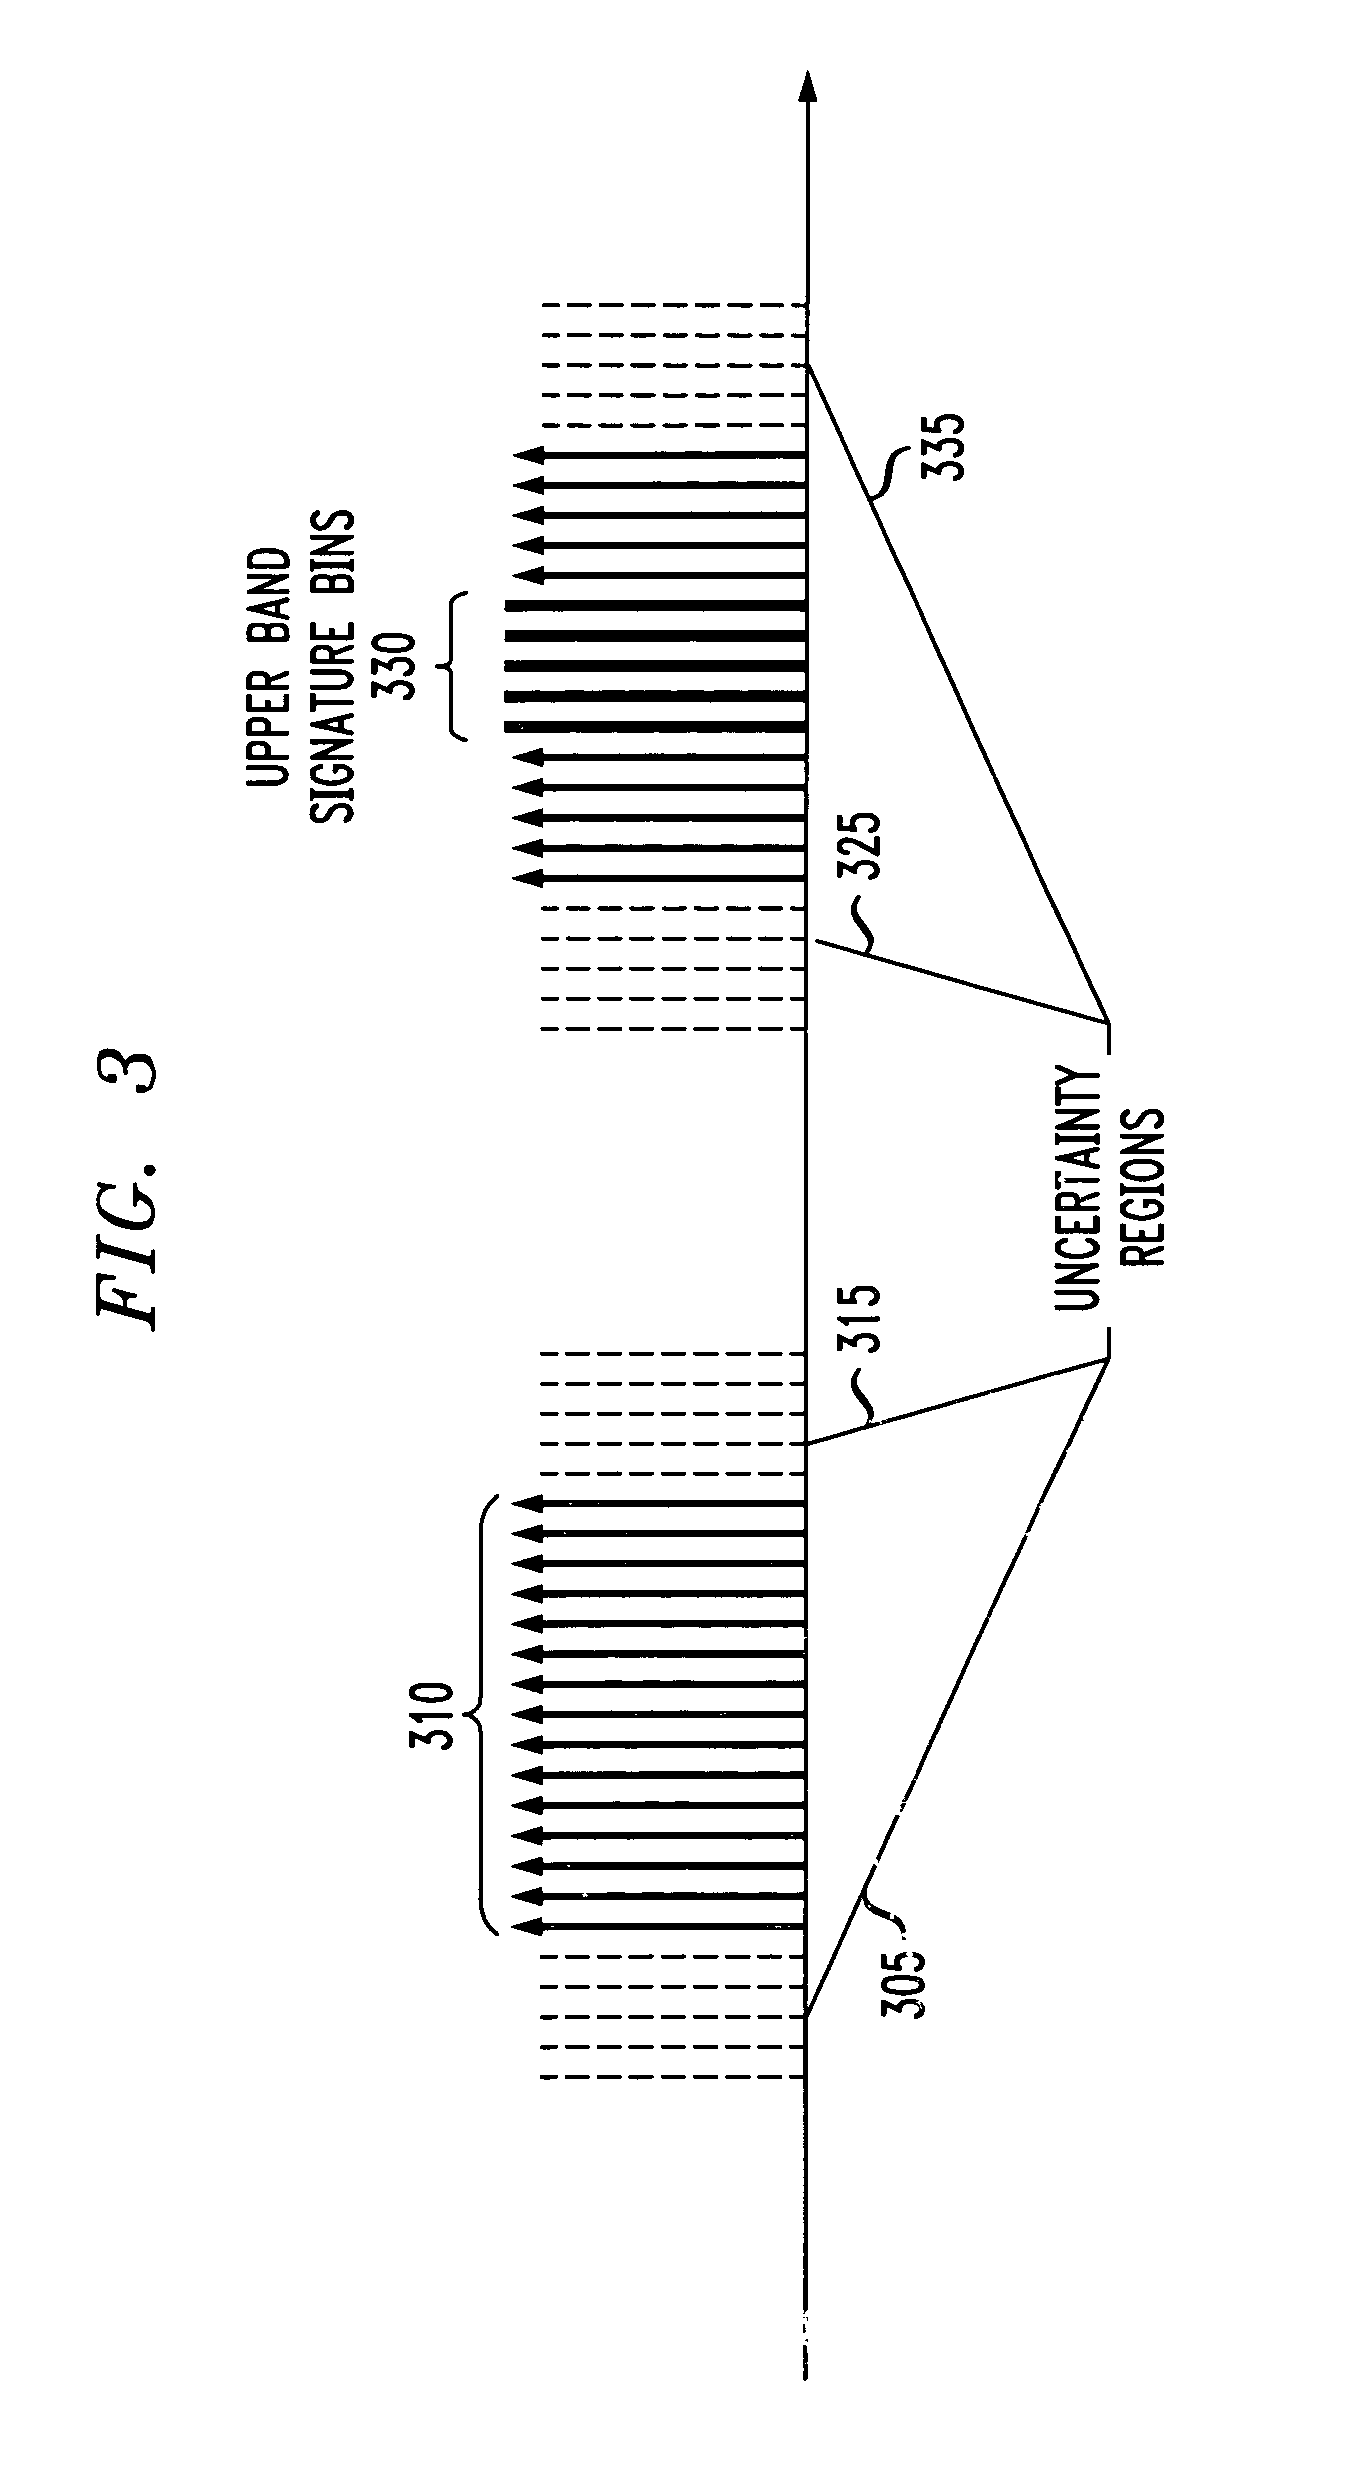 Method and apparatus for frequency offset estimation and interleaver synchronization using periodic signature sequences